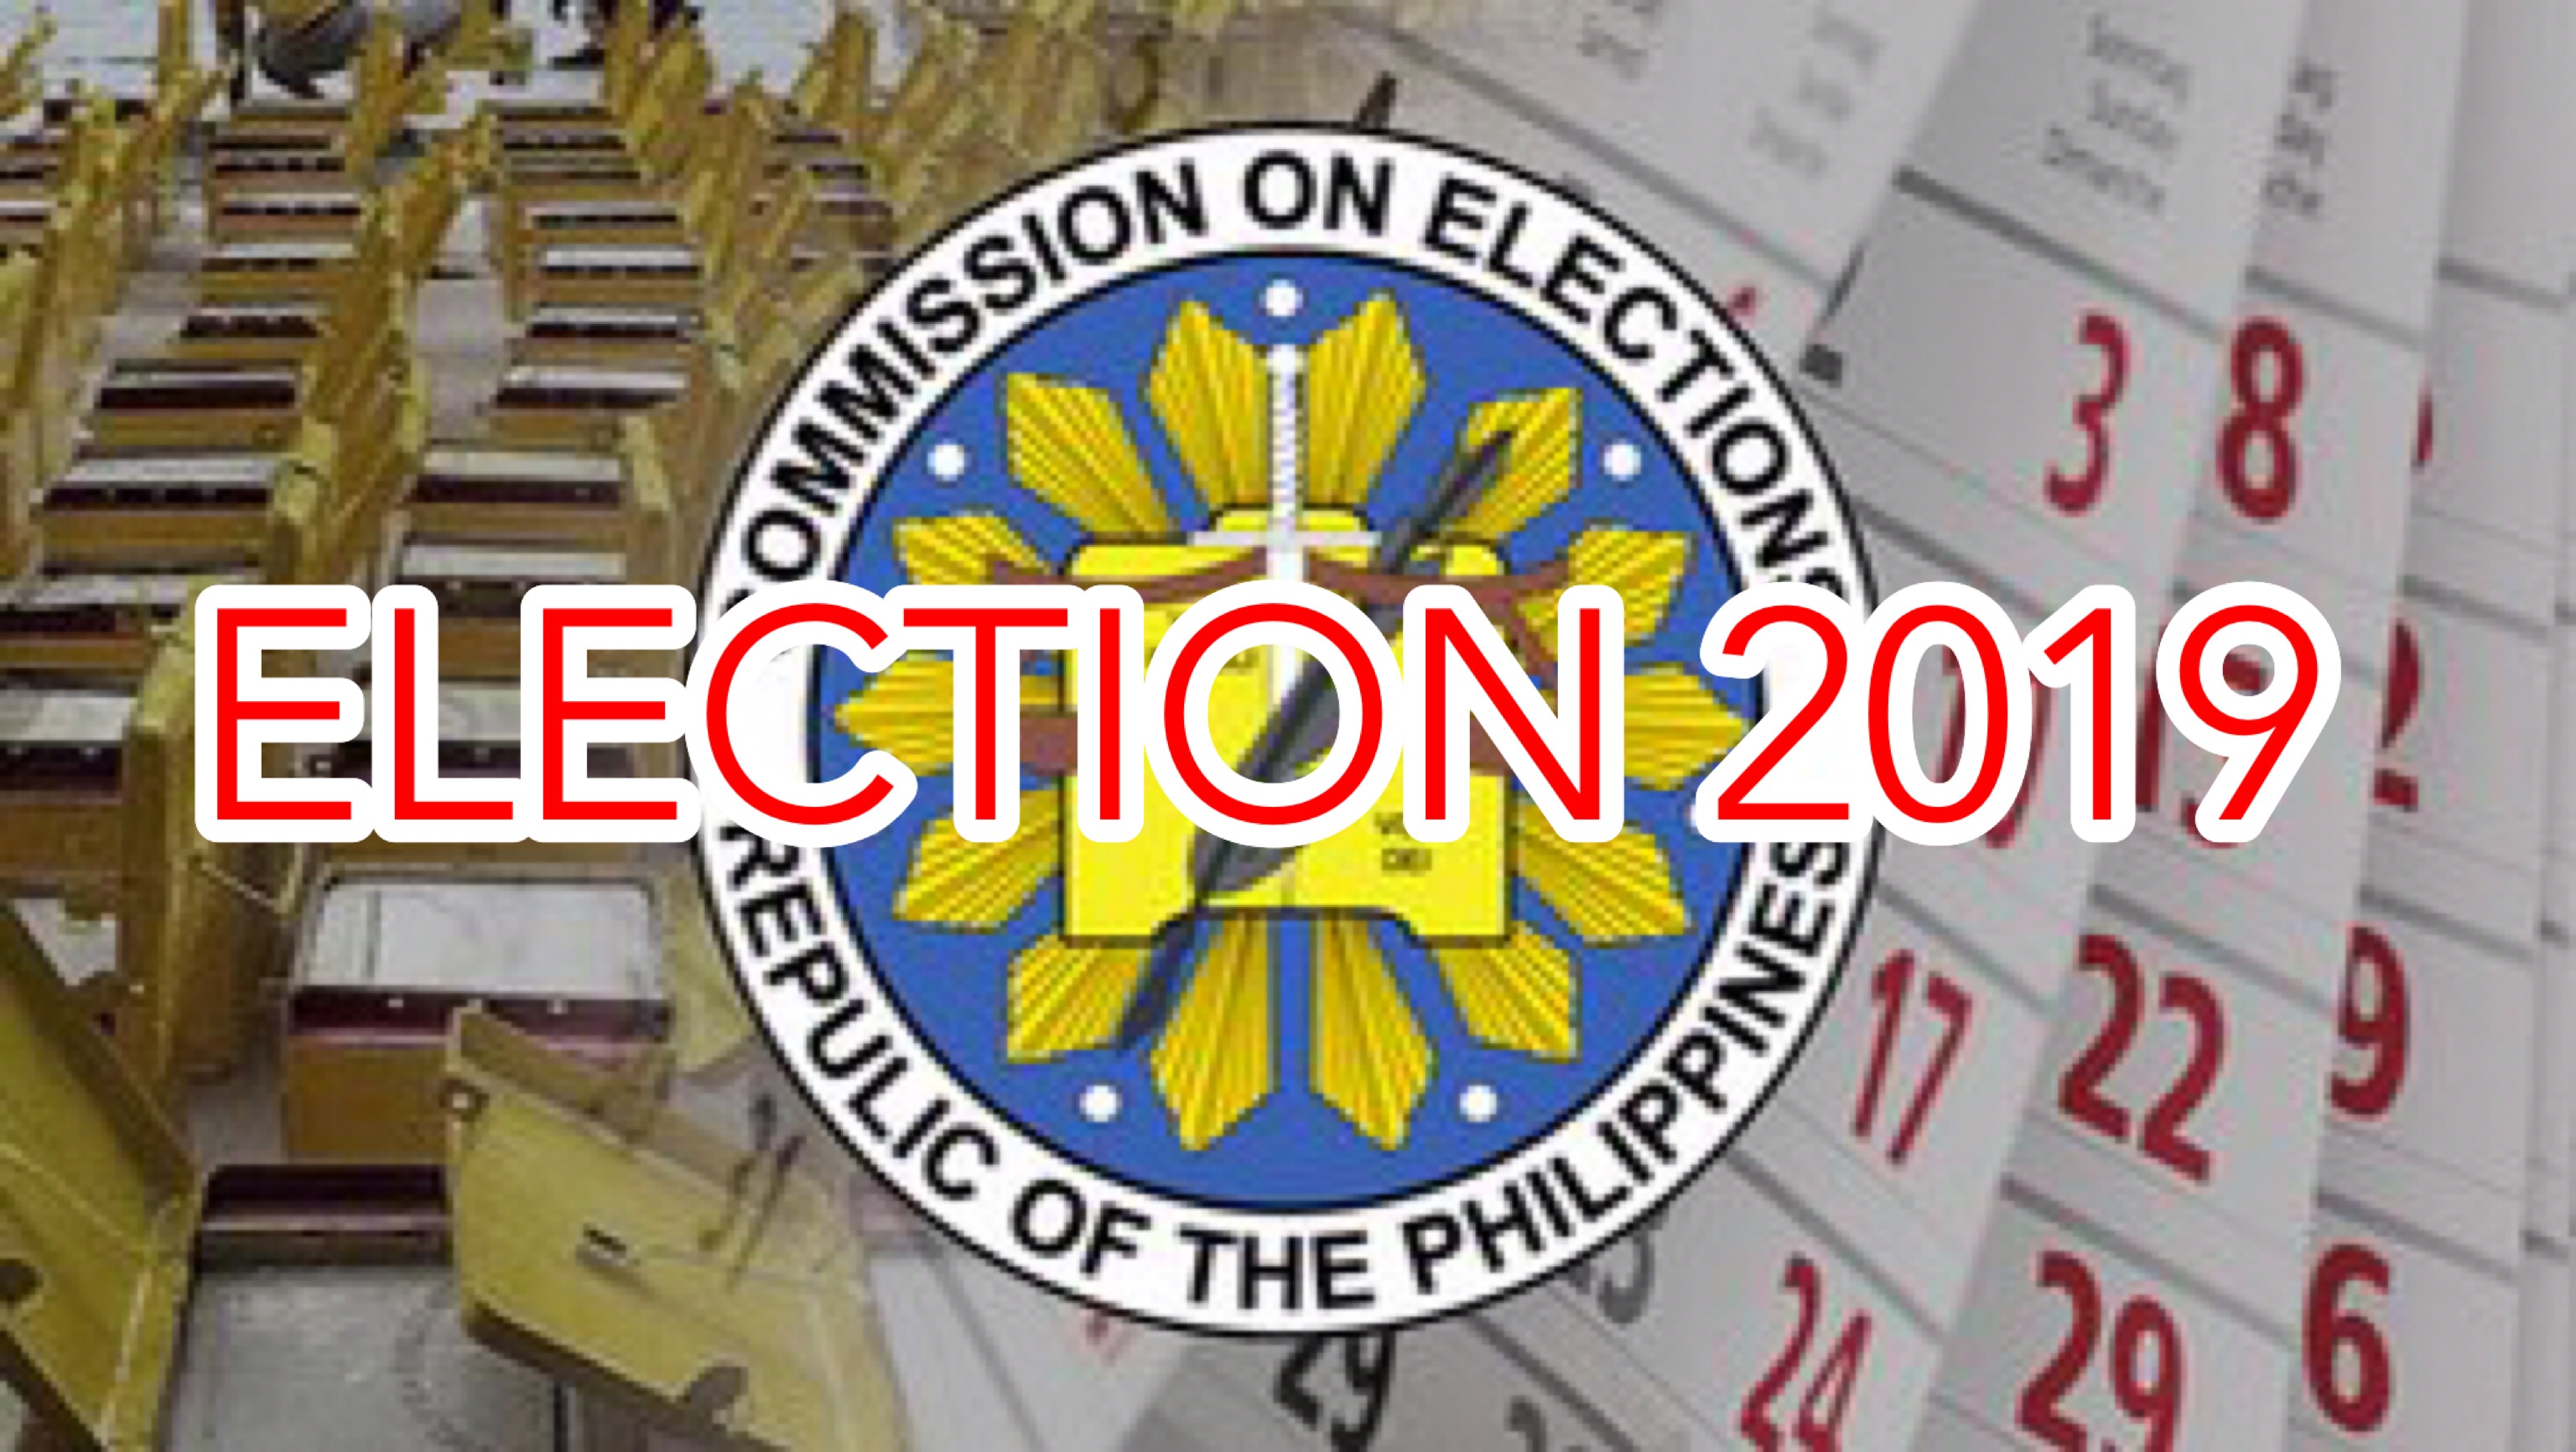 Election Again, Are You Excited to Vote this 2019 in Philippine Election?